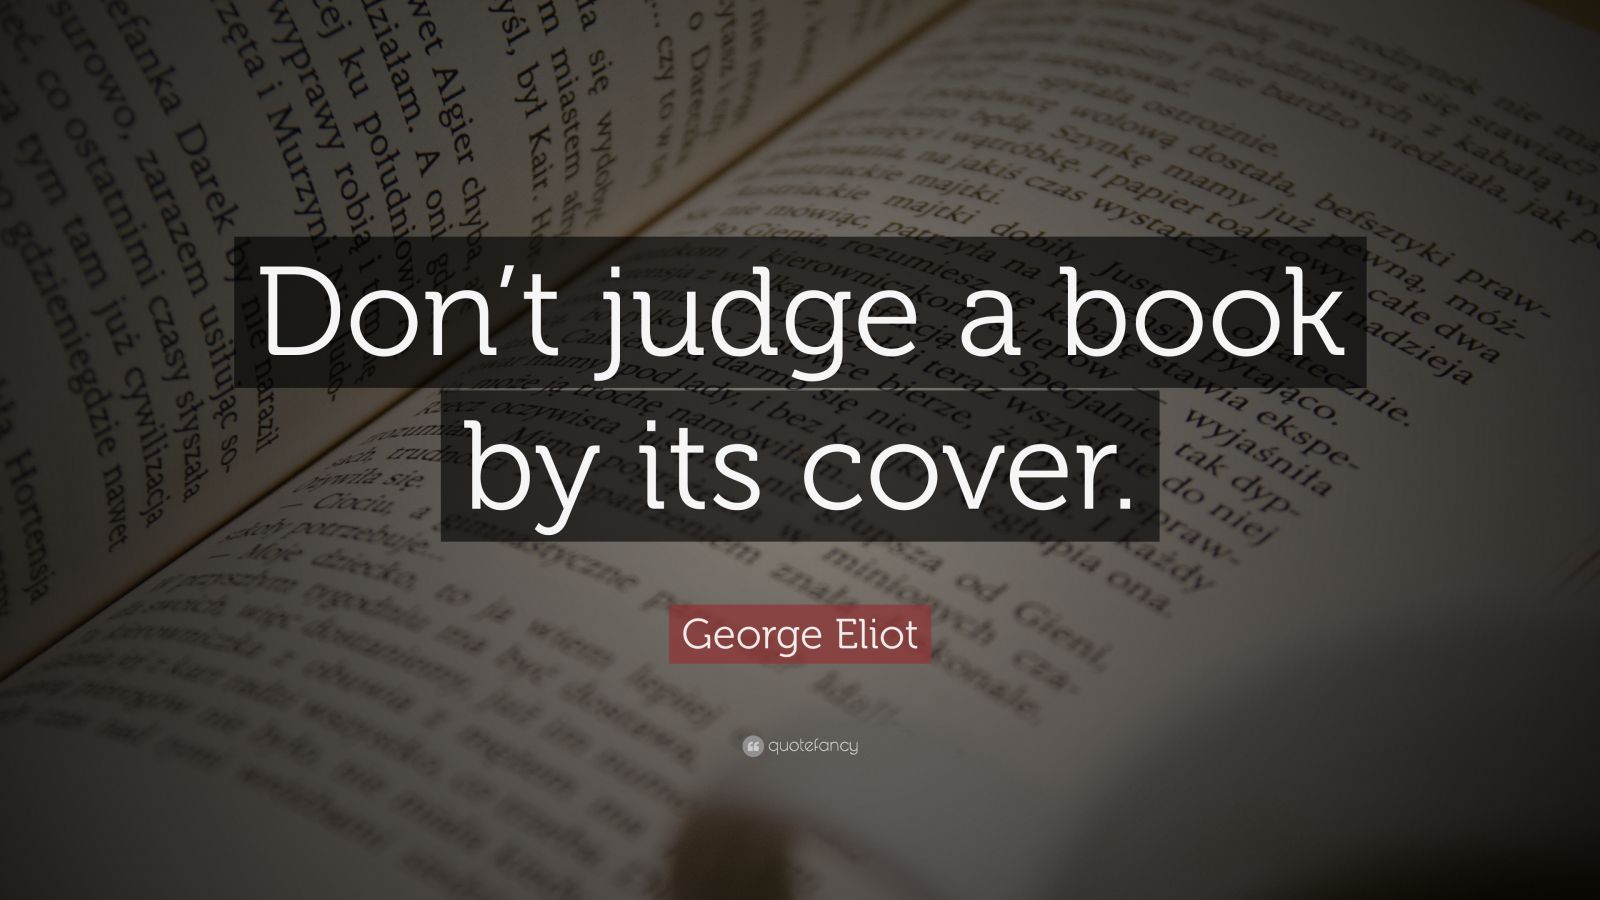 essay don't judge a book by its cover